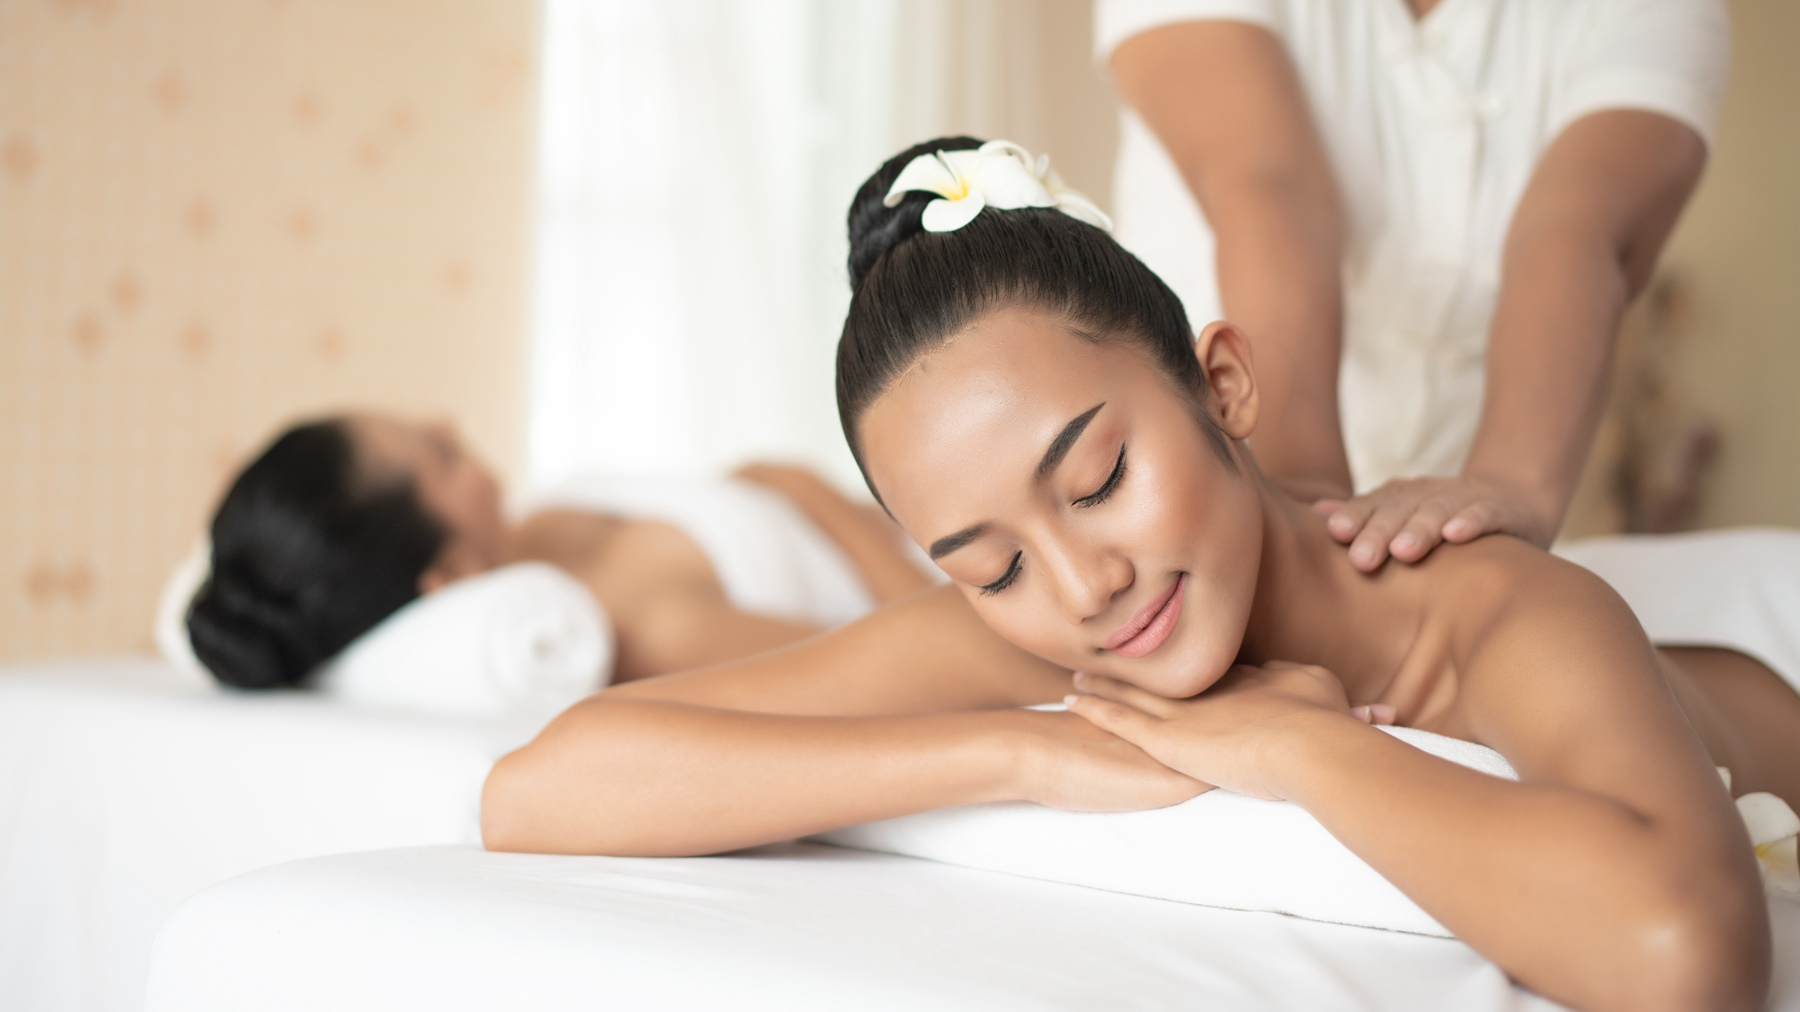 Why Massage Is Very Popular?